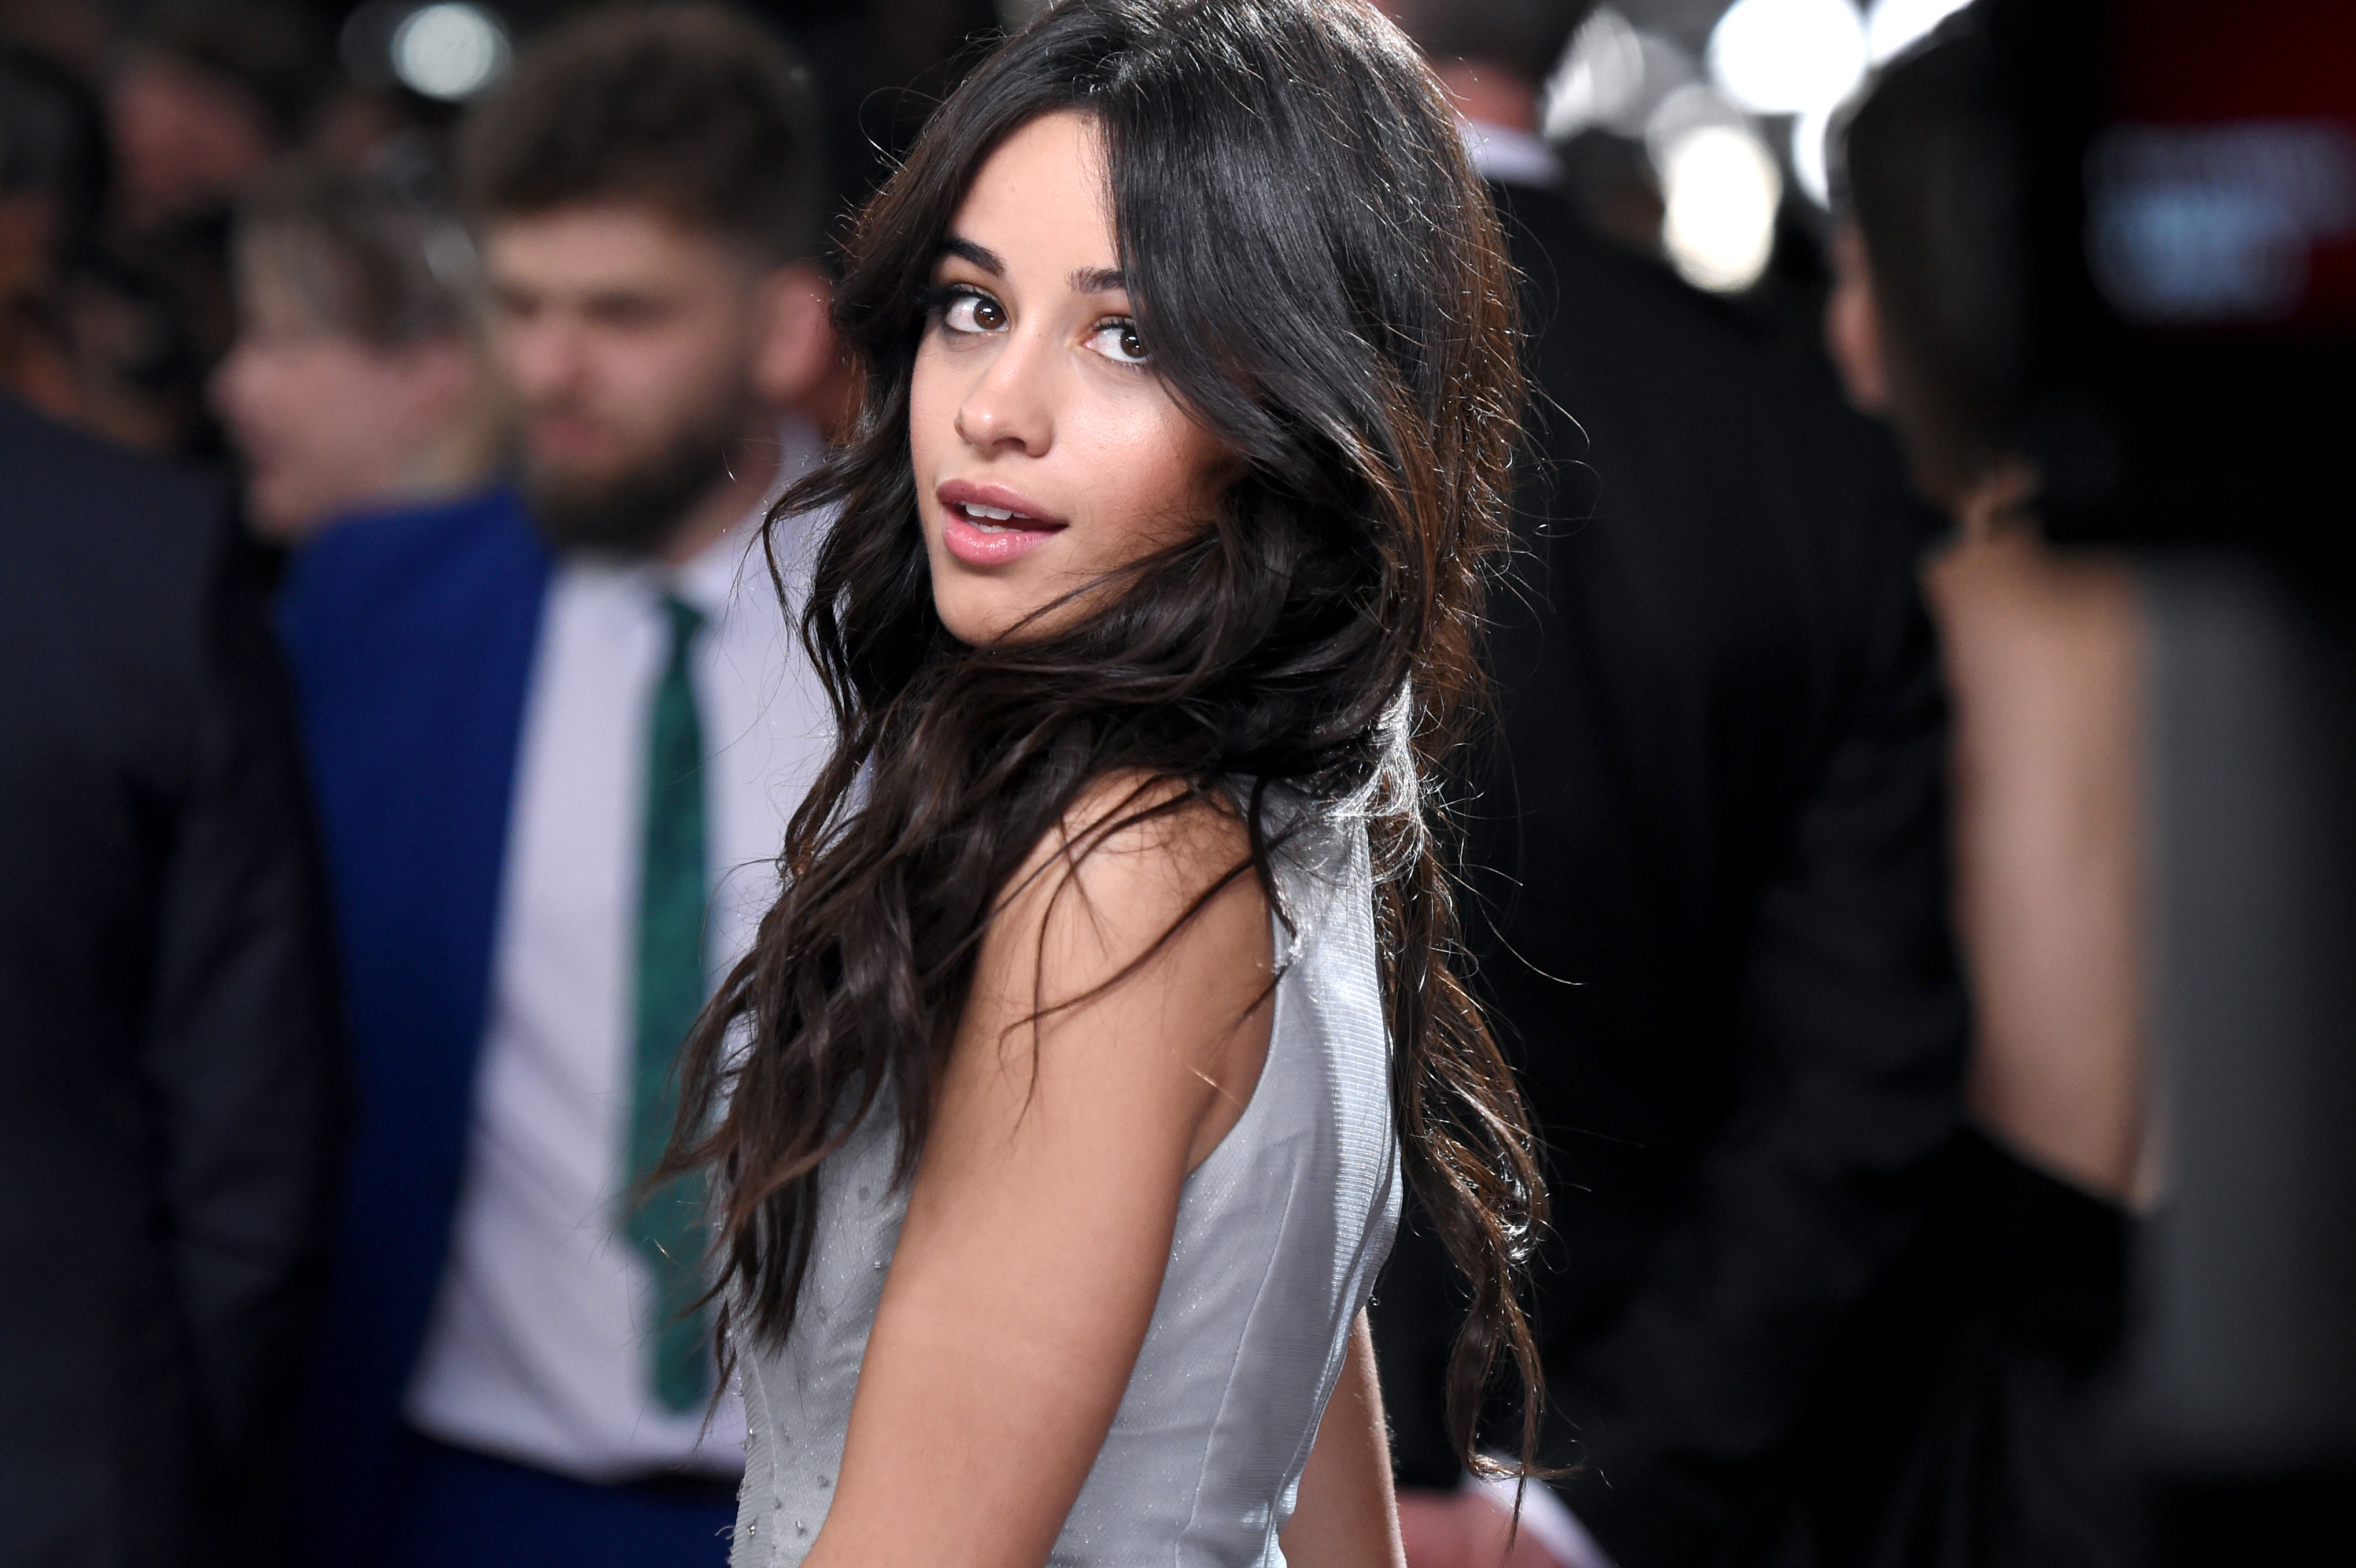 Camila Cabello attends The 59th GRAMMY Awards on February 12, 2017 in Los Angeles, California. (Photo by Frazer Harrison/Getty Images)